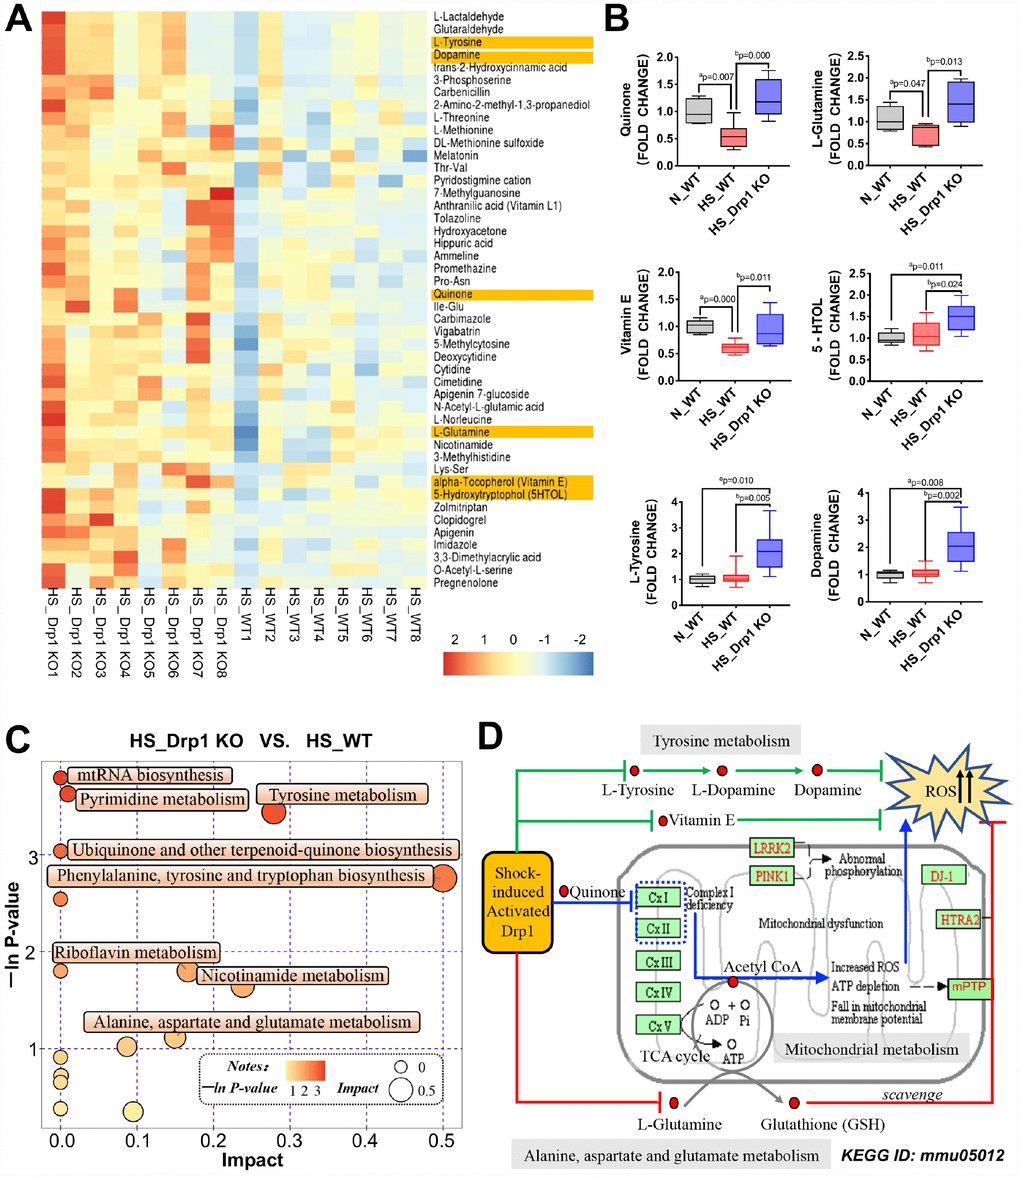 The effects of Drp1 on mitochondrial metabolism after shock. (A) Heatmap of differentially-expressed metabolites affected by Drp1 in colon tissues. Our concerned differential metabolites are labeled in yellow (8 mice/ group). (B) The fold change values of our concerned metabolites detected by metabolomics mass spectrometry (8 mice/ group). (C) The bubble map of differentially-expressed metabolic pathways affected by Drp1 in colon tissues. Each bubble represents a metabolic pathway. The abscissa and the size of bubbles indicate the impact of pathways. The bigger the bubble size is, the bigger the impact is. The ordinate and the color of bubbles indicate the P value of enrichment analysis (Expressed in the form of -ln P-value). The deeper the bubble color is, the smaller the P value is. (D) KEGG pathway annotation of differential metabolites and pathways affected by Drp1 after shock. The annotation is edited based on KEGG ID: mmu05012. N